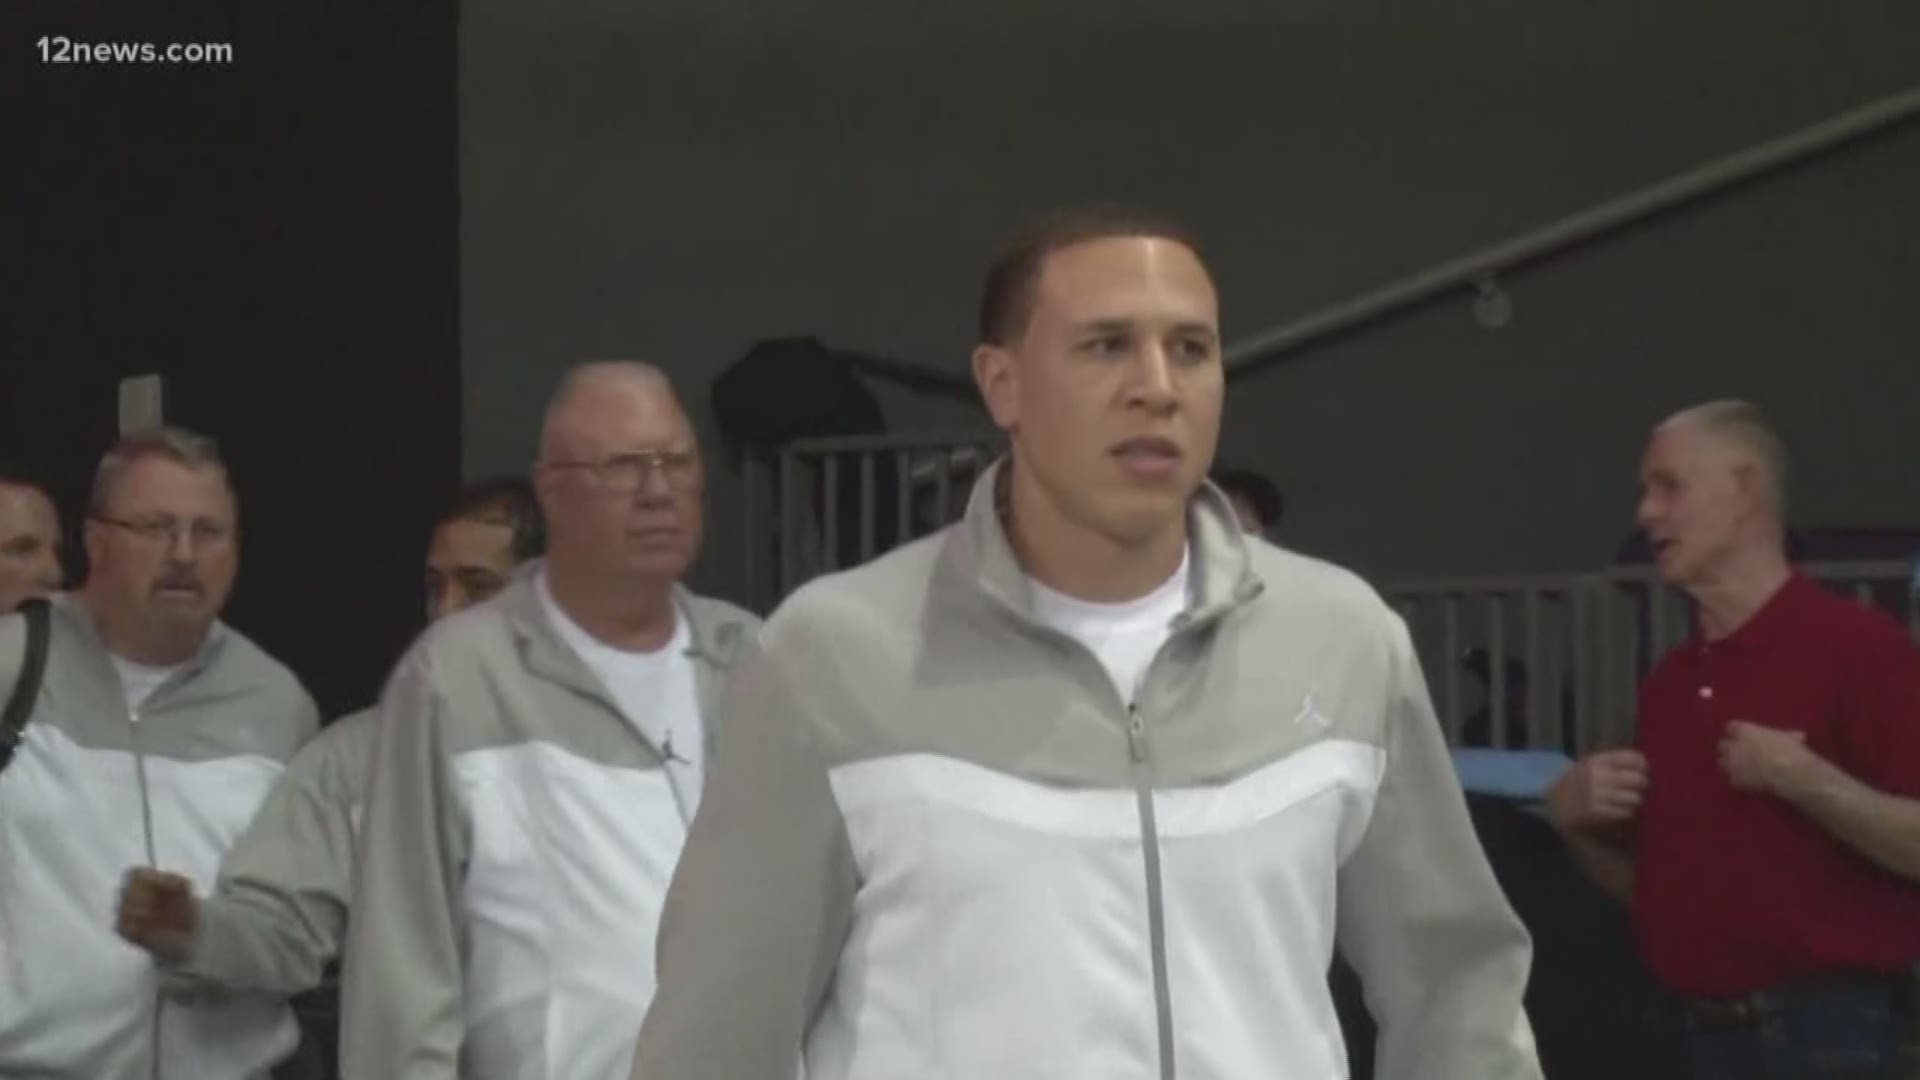 Phoenix police opened an investigation on Feb. 14 into the accusations of sexual abuse against former NBA player and Shadow Mountain HS basketball coach Mike Bibby, the school district said.